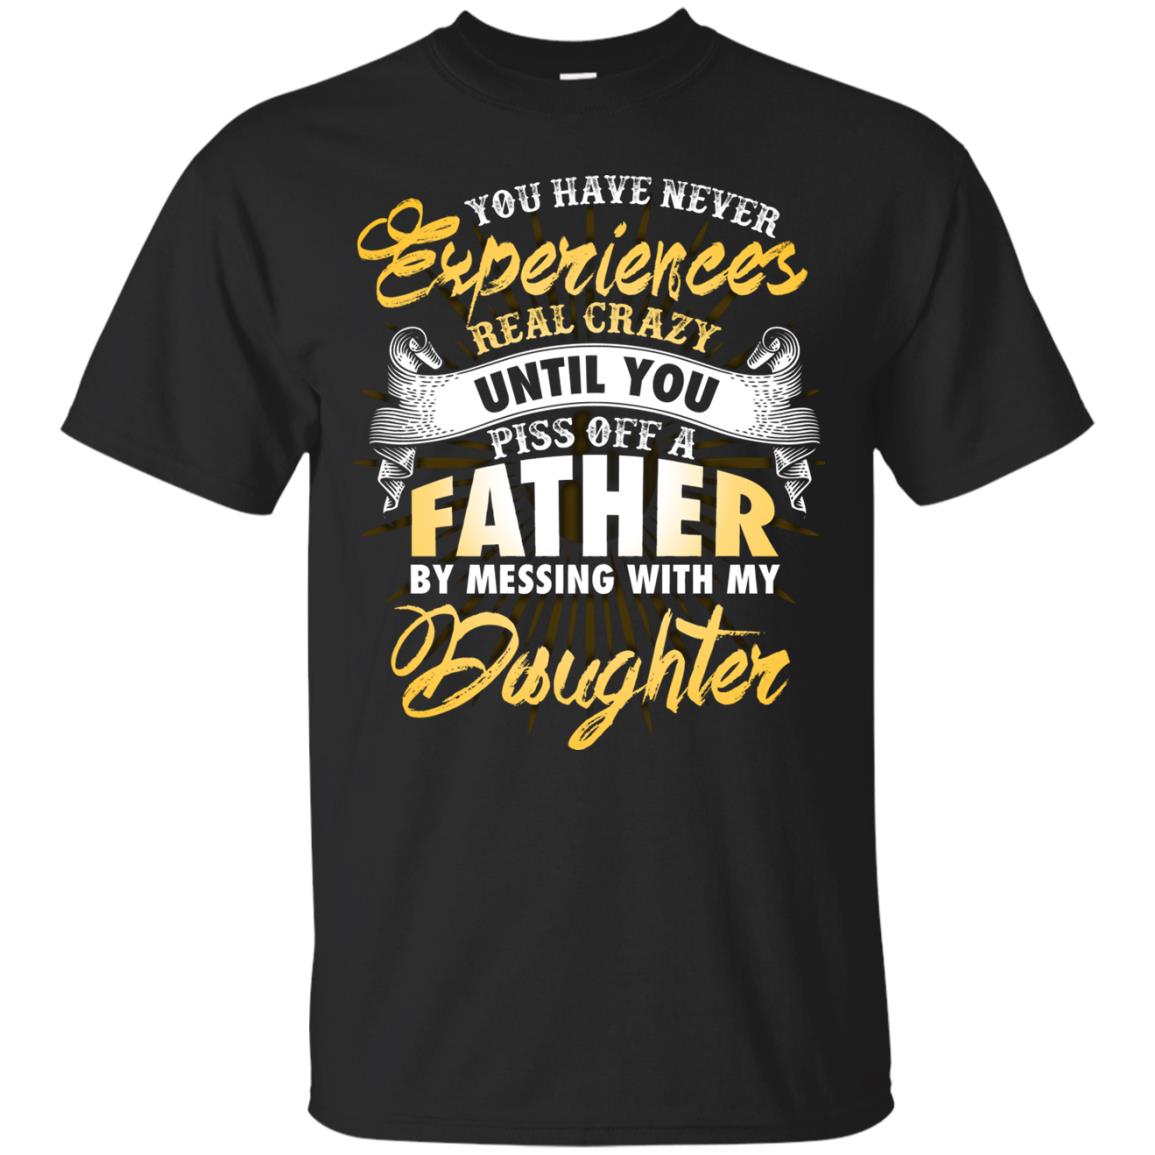 You Have Never Experiences Real Crazy Until You Piss Off A Father By Messing With My DaughterG200 Gildan Ultra Cotton T-Shirt